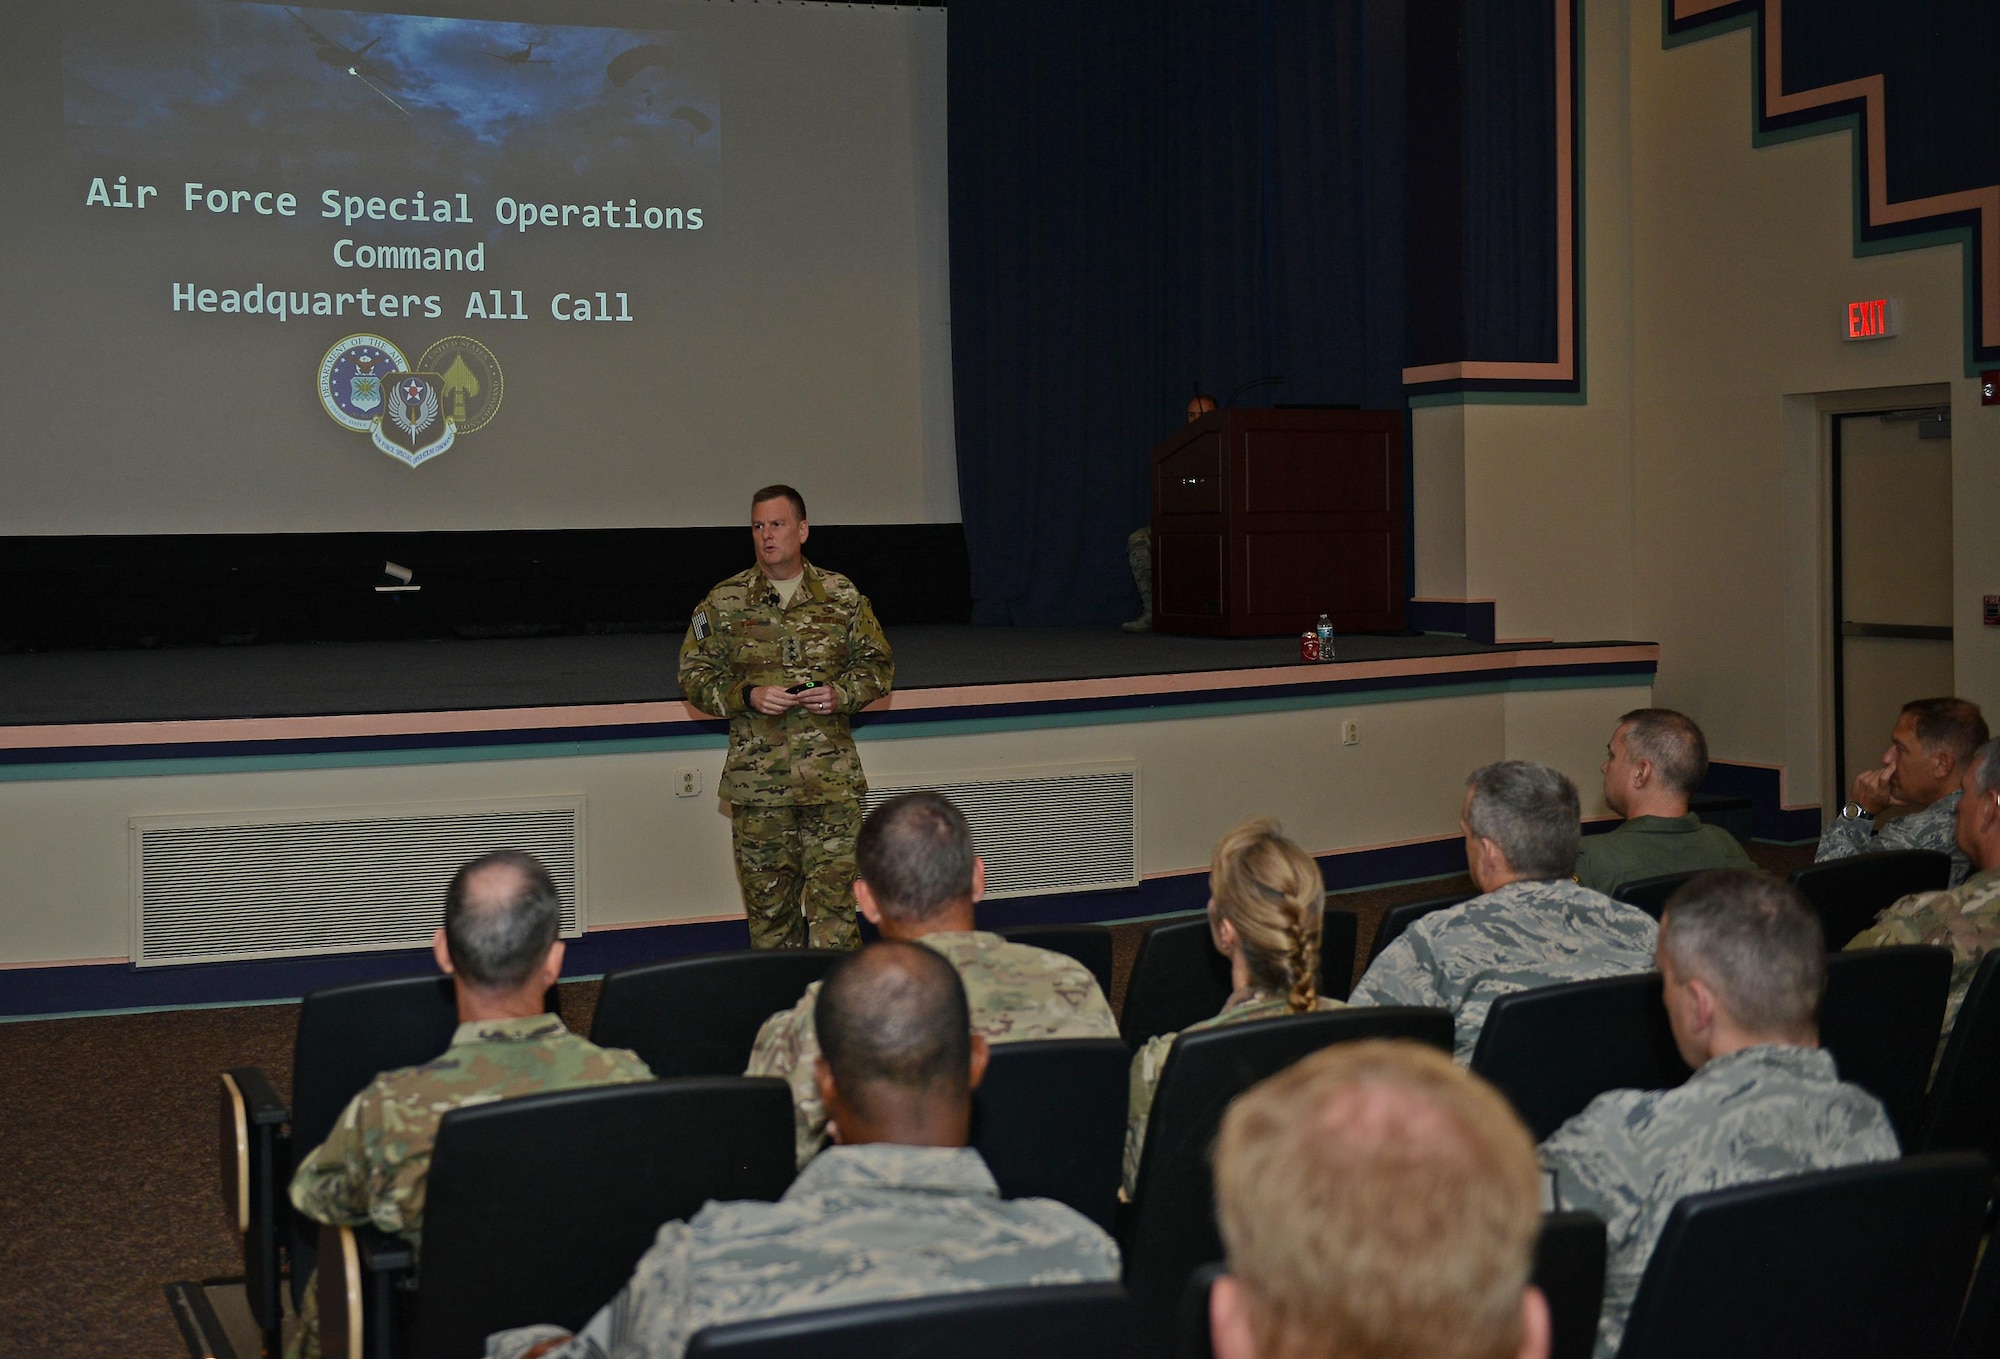 Lt. Gen. Brad Webb, commander of Air Force Special Operations Command, speaks at an all call on Hurlburt Field, Fla., Aug. 30, 2016. Webb said he wants AFSOC to focus on readiness today, relevance tomorrow and resilience always. (U.S. Air Force photo/Staff Sgt. Melanie Holochwost)